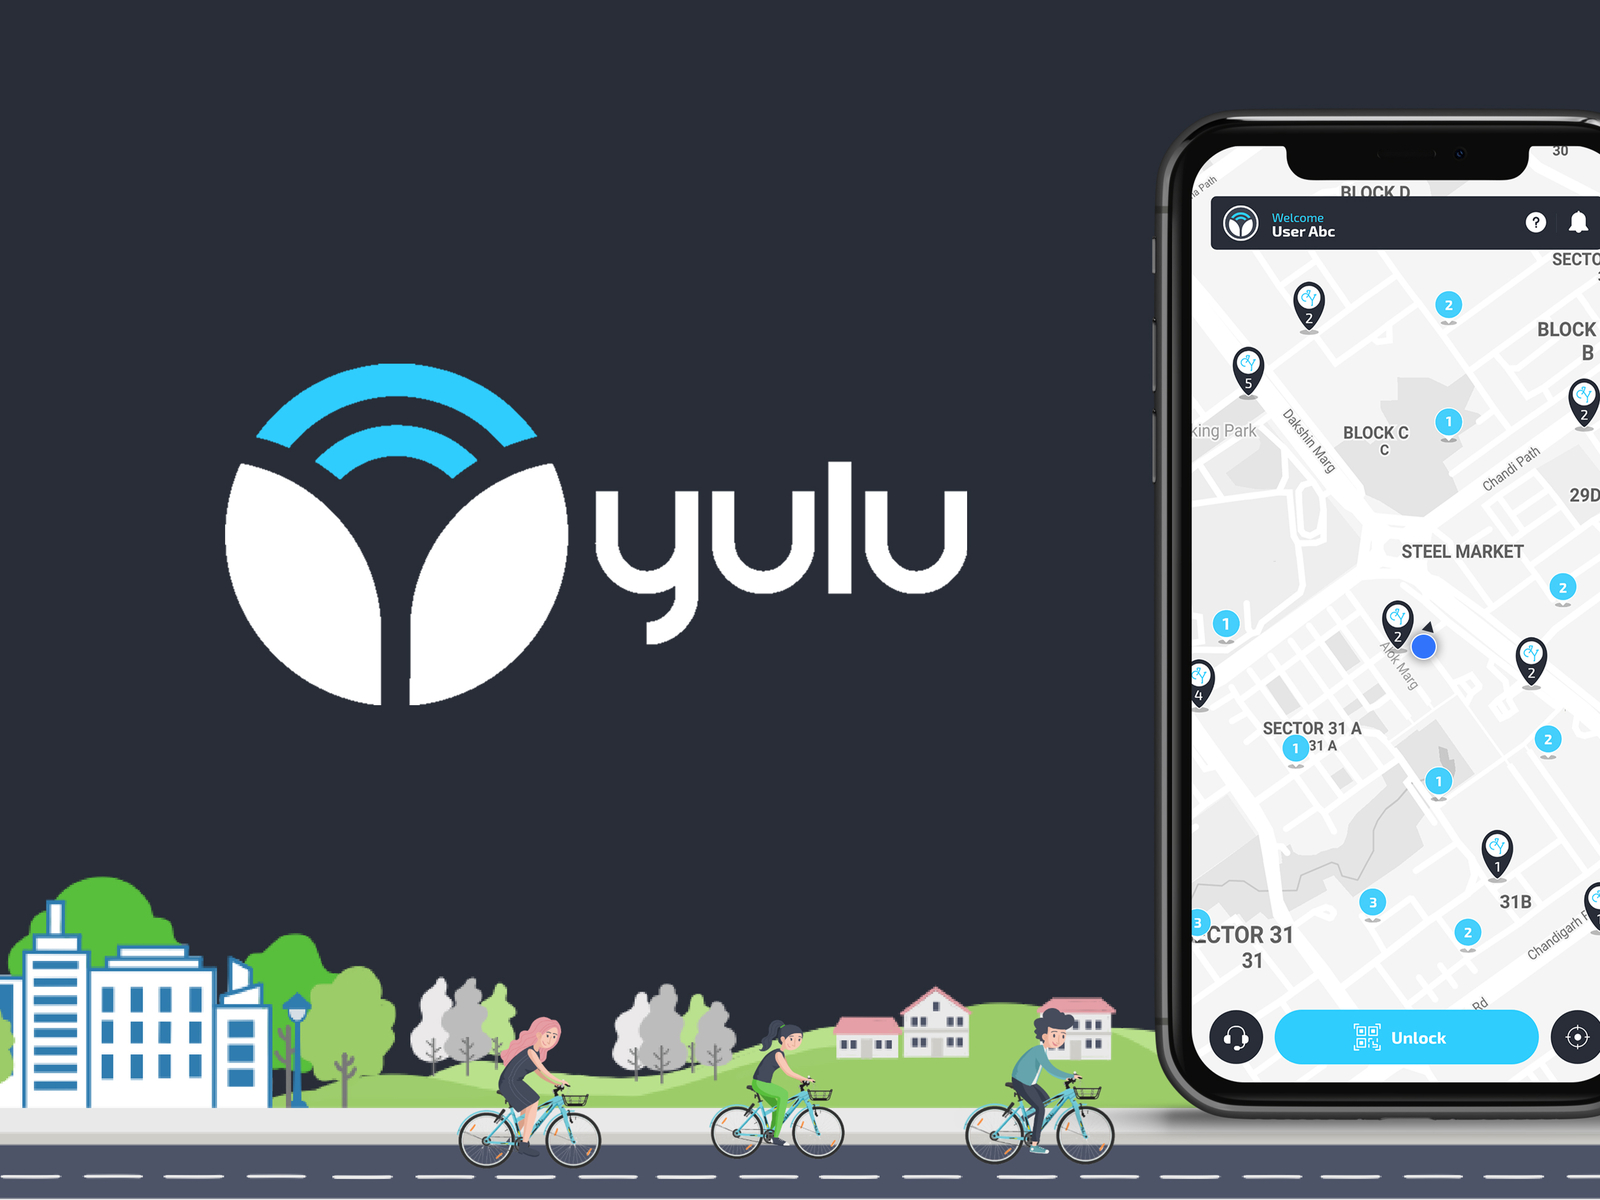 yulu bikes contact number